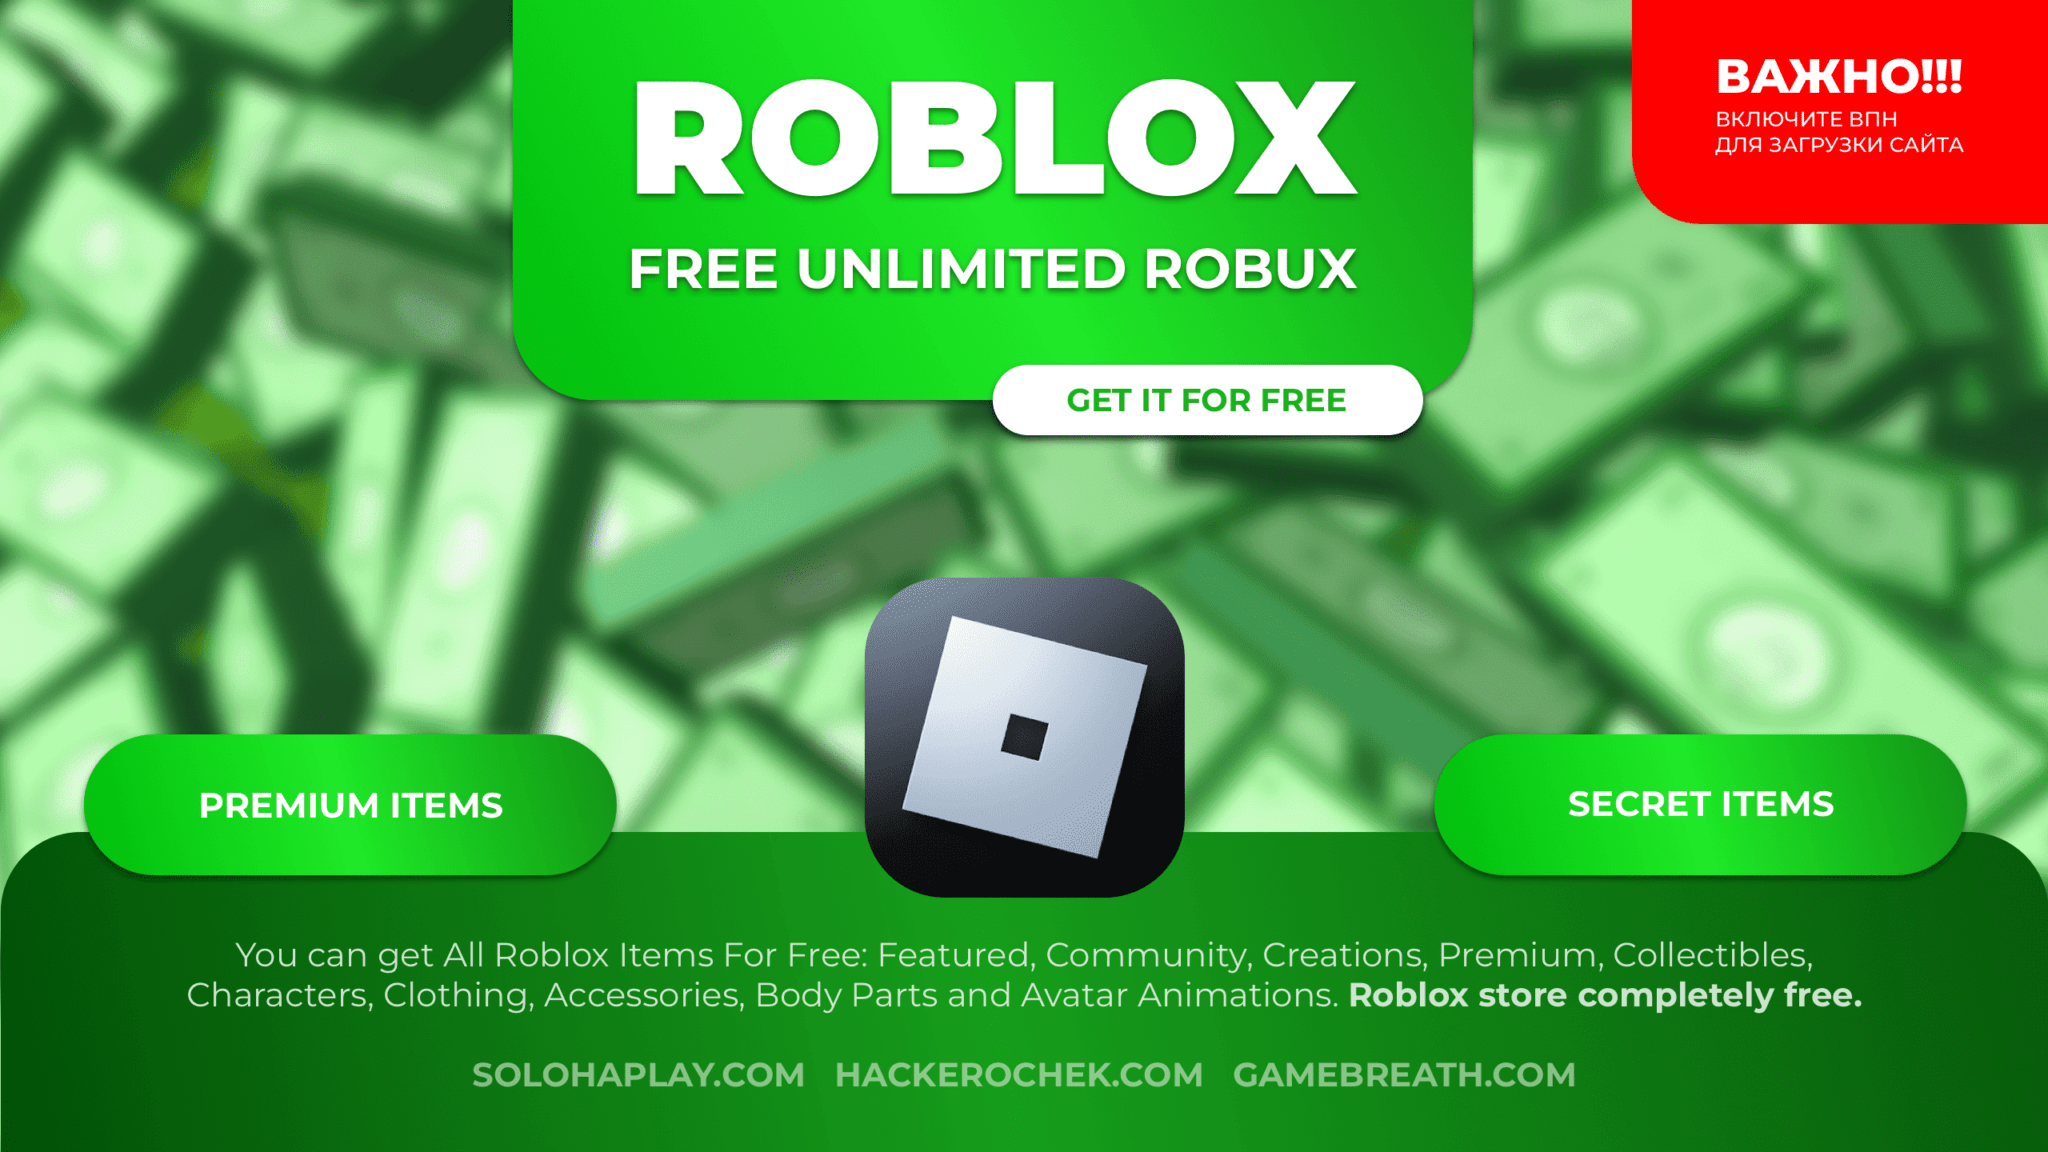 How To Get Free Robux in Roblox Unlimited Robux For Free Soloha Play